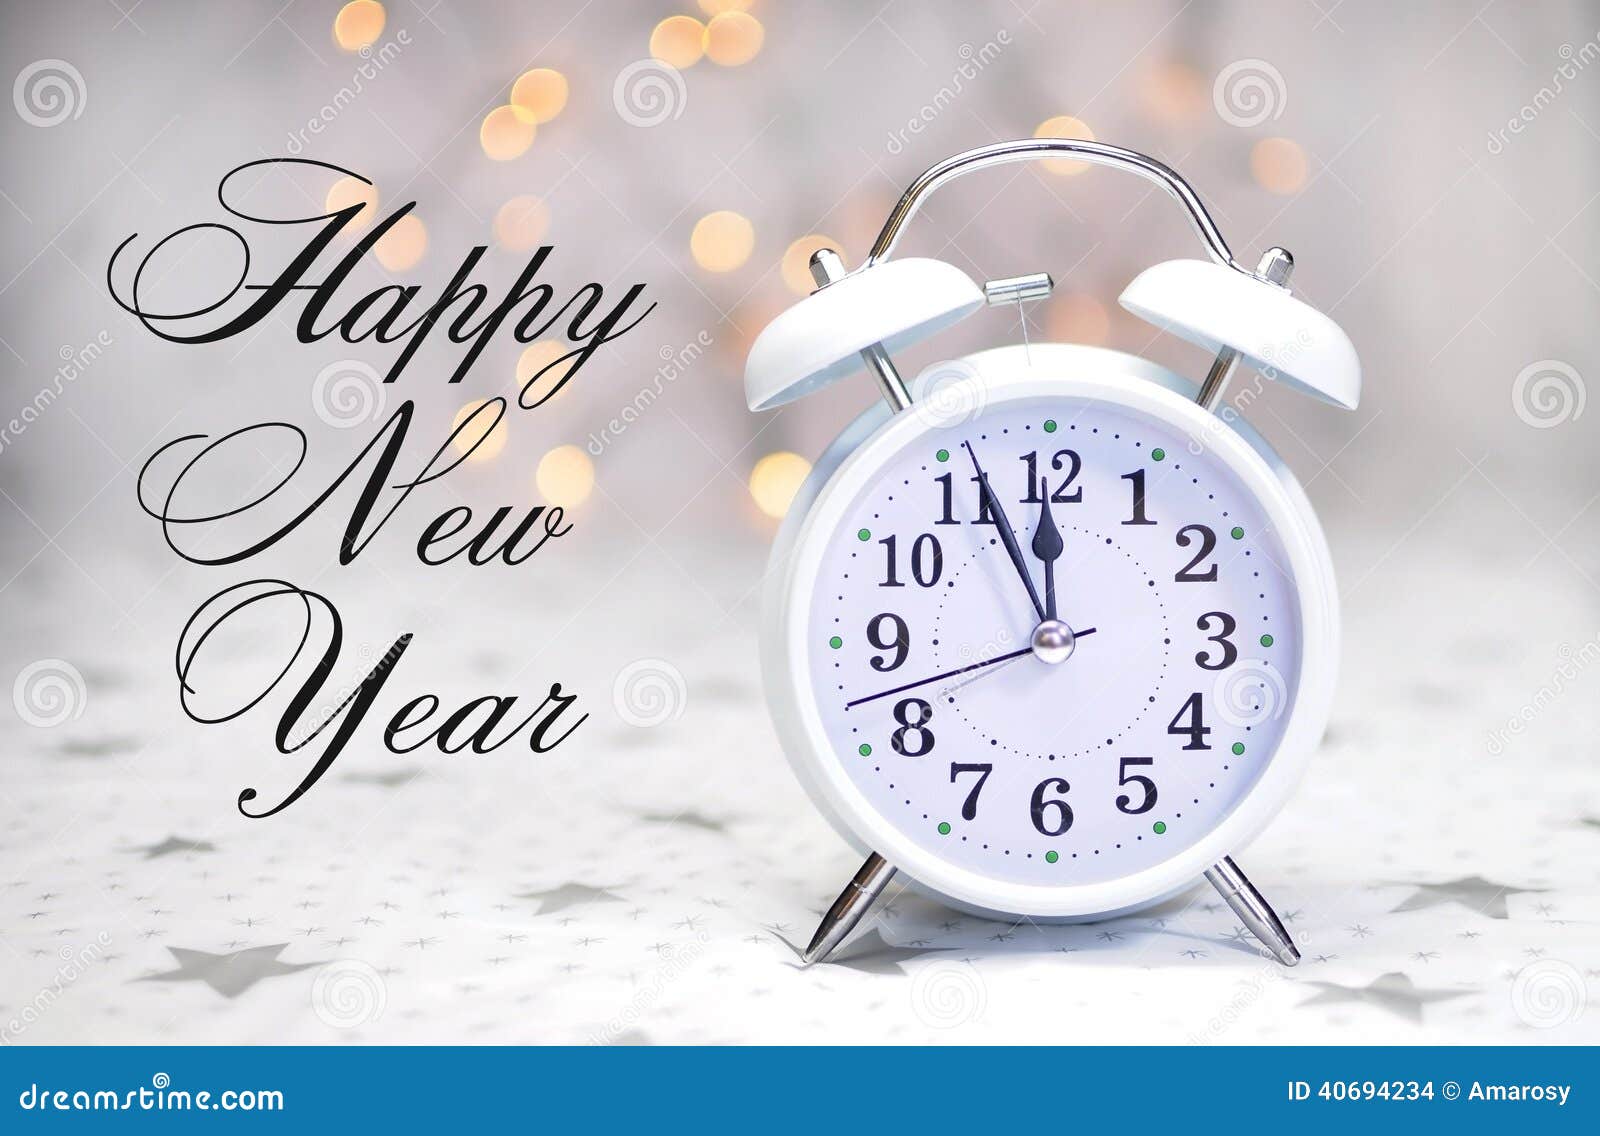 Happy New Year Message With White Retro Clock With Sample 